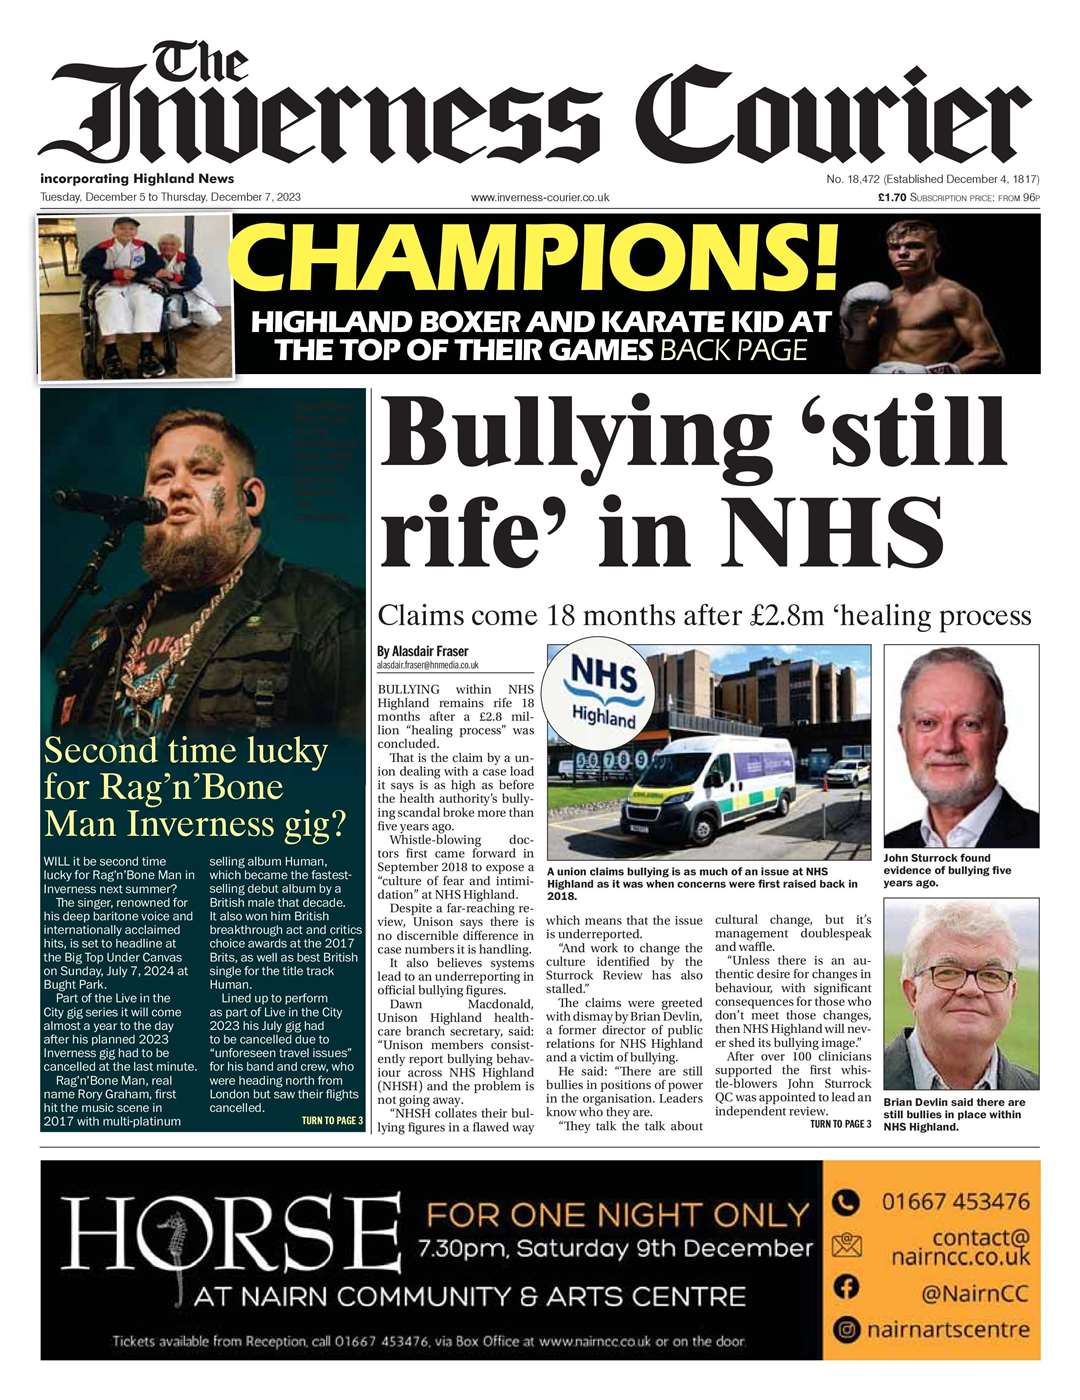 The Inverness Courier, December 5, front page.